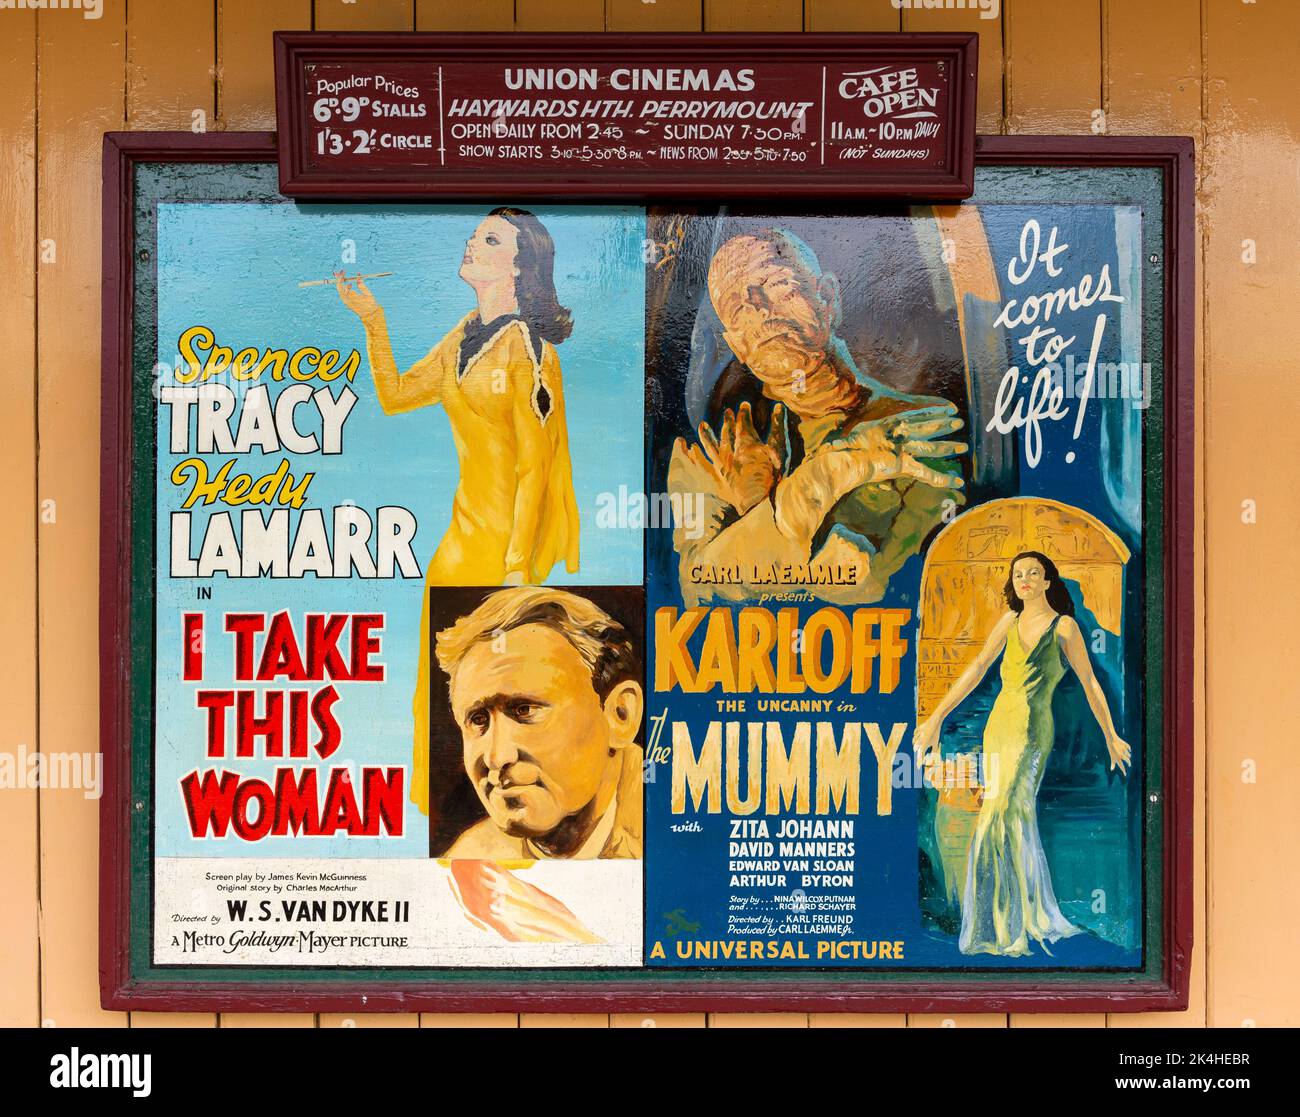 A vintage cinema advertising poster with 'The Mummy' with Boris Karloff (1932) and 'I take this woman' starring Hedy Lamarr (1940) Stock Photo